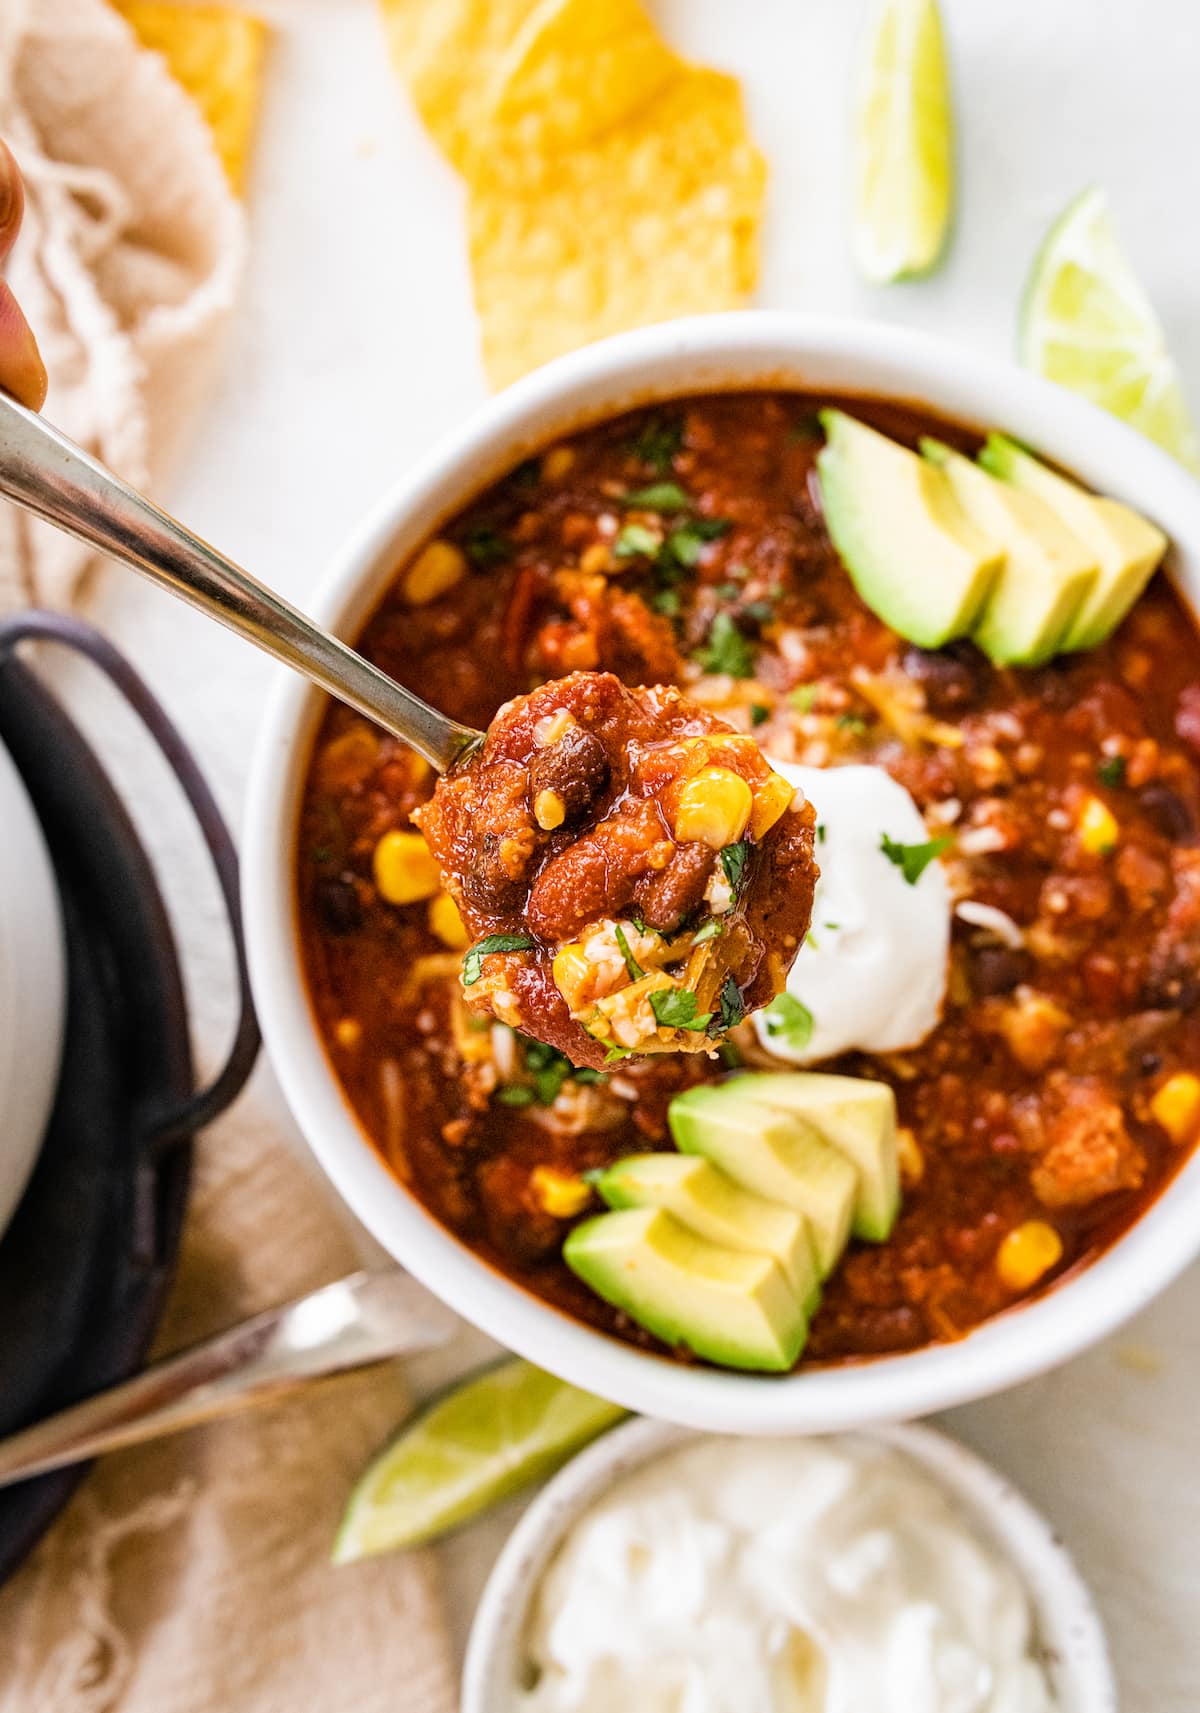 A spoonful of turkey chili being held over a white bowl of the chili.